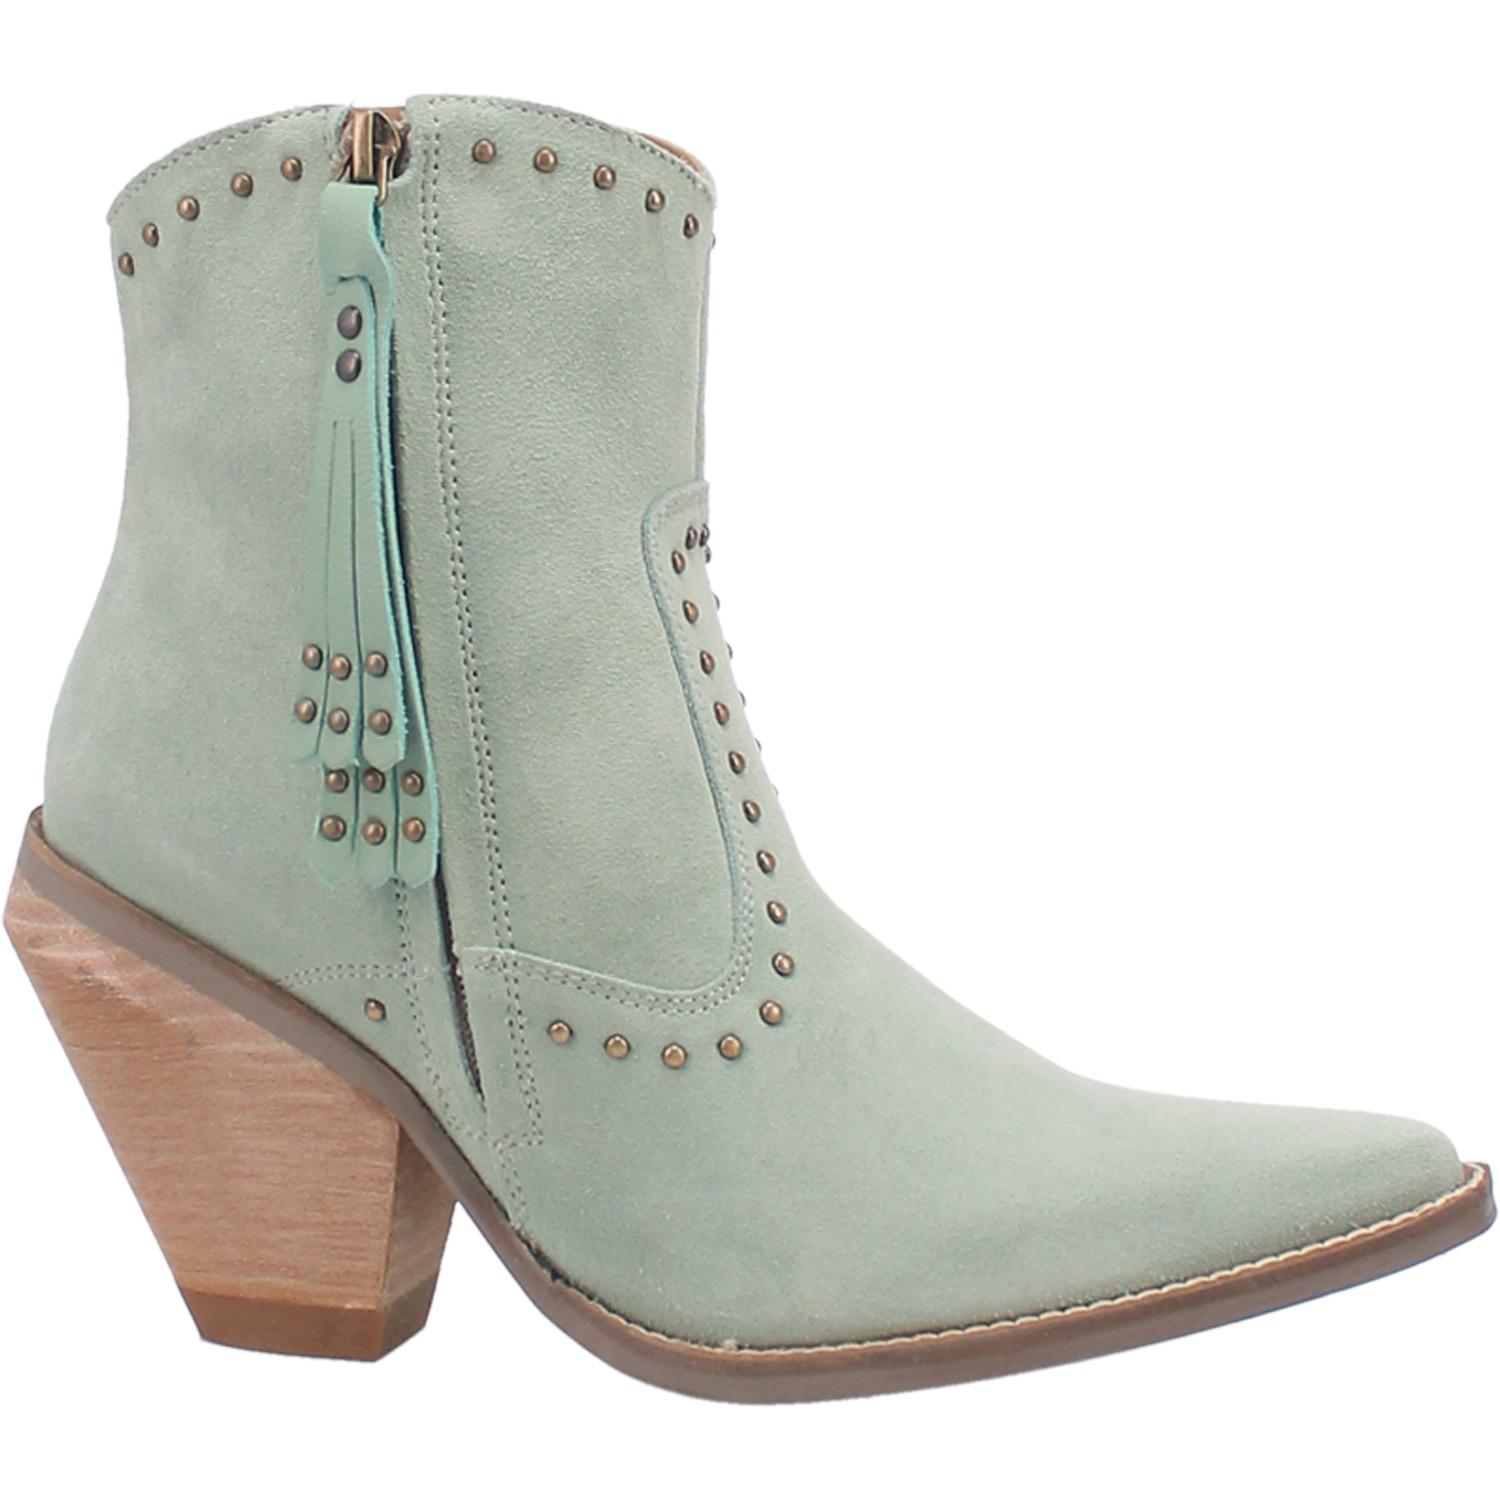 Classy N' Sassy Studded Mint Suede Booties (DS)